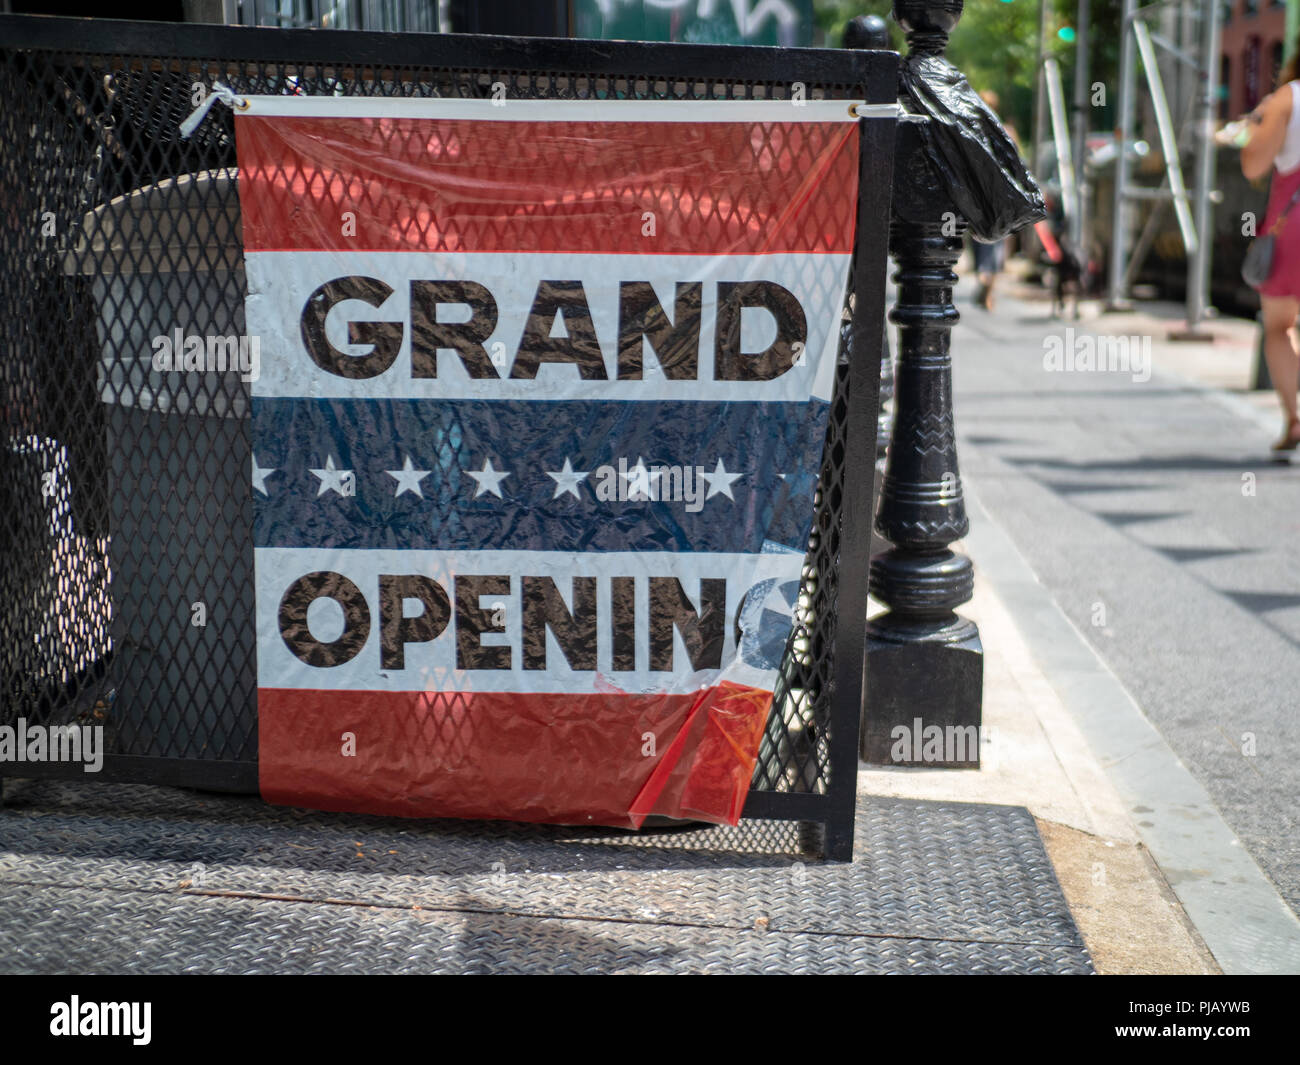 Makeshift grand opening sign hanging outside storefront on street  Stock Photo